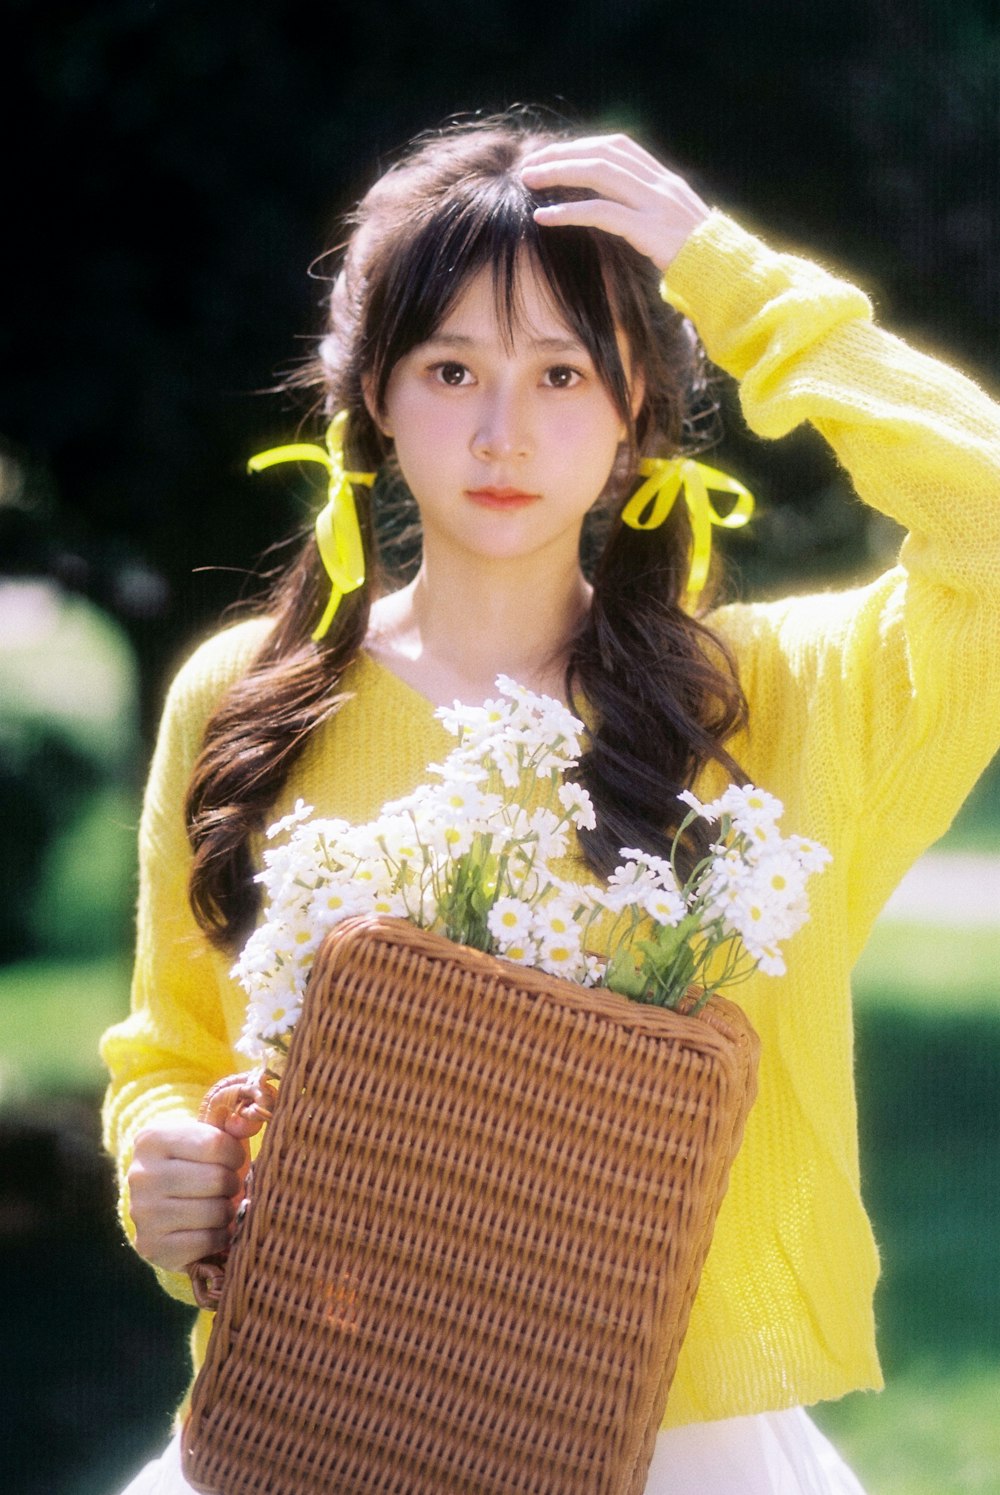 a woman holding a basket with flowers in it